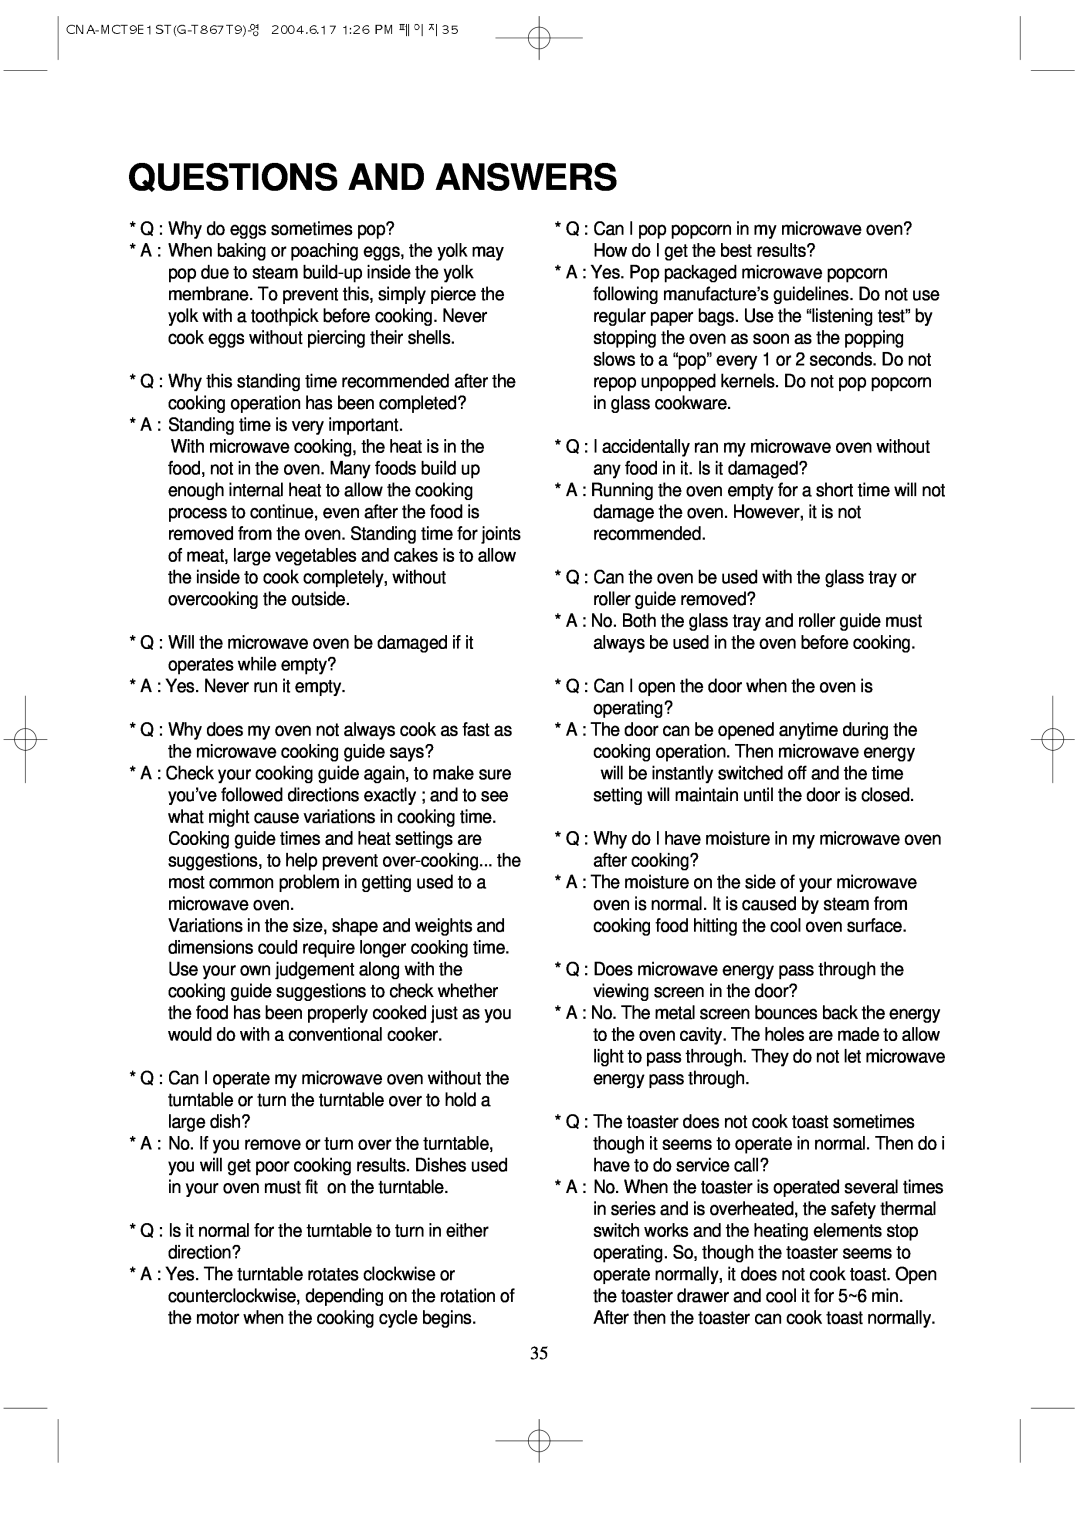 Magic Chef MCT9E1ST manual Questions And Answers 